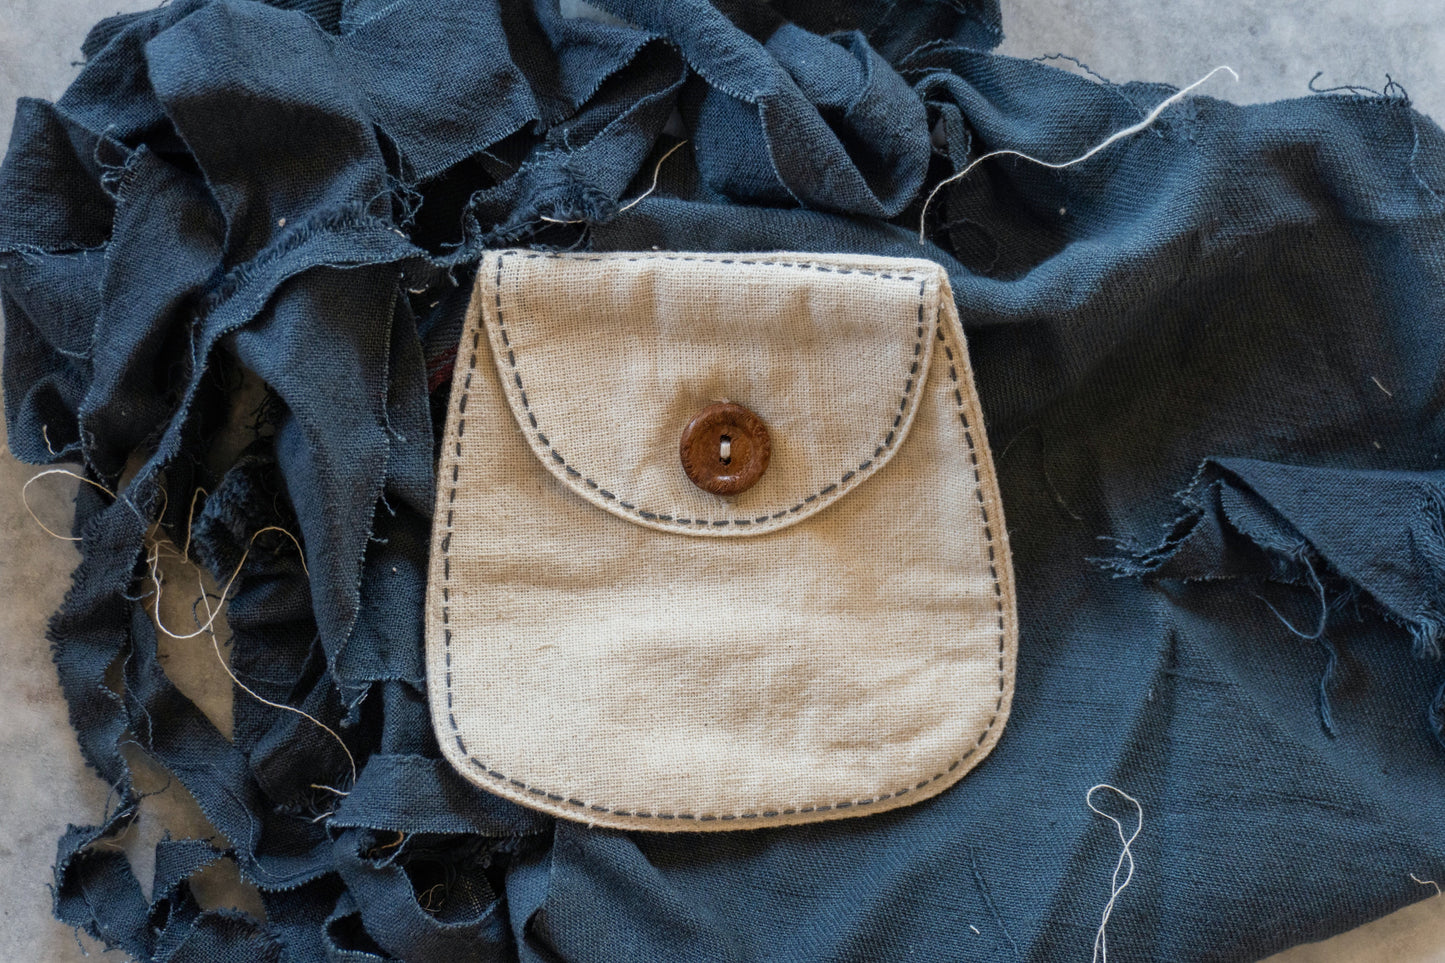 Beige/Charcoal Grey/White Upcycled Cotton Belt Bag at Kamakhyaa by Lafaani. This item is Add Ons, Bags, Belt Bags, Casual Wear, Free Size, Less than $50, Multicolor, Natural, Products less than $25, Solids, Upcycled, Upcycled Cotton